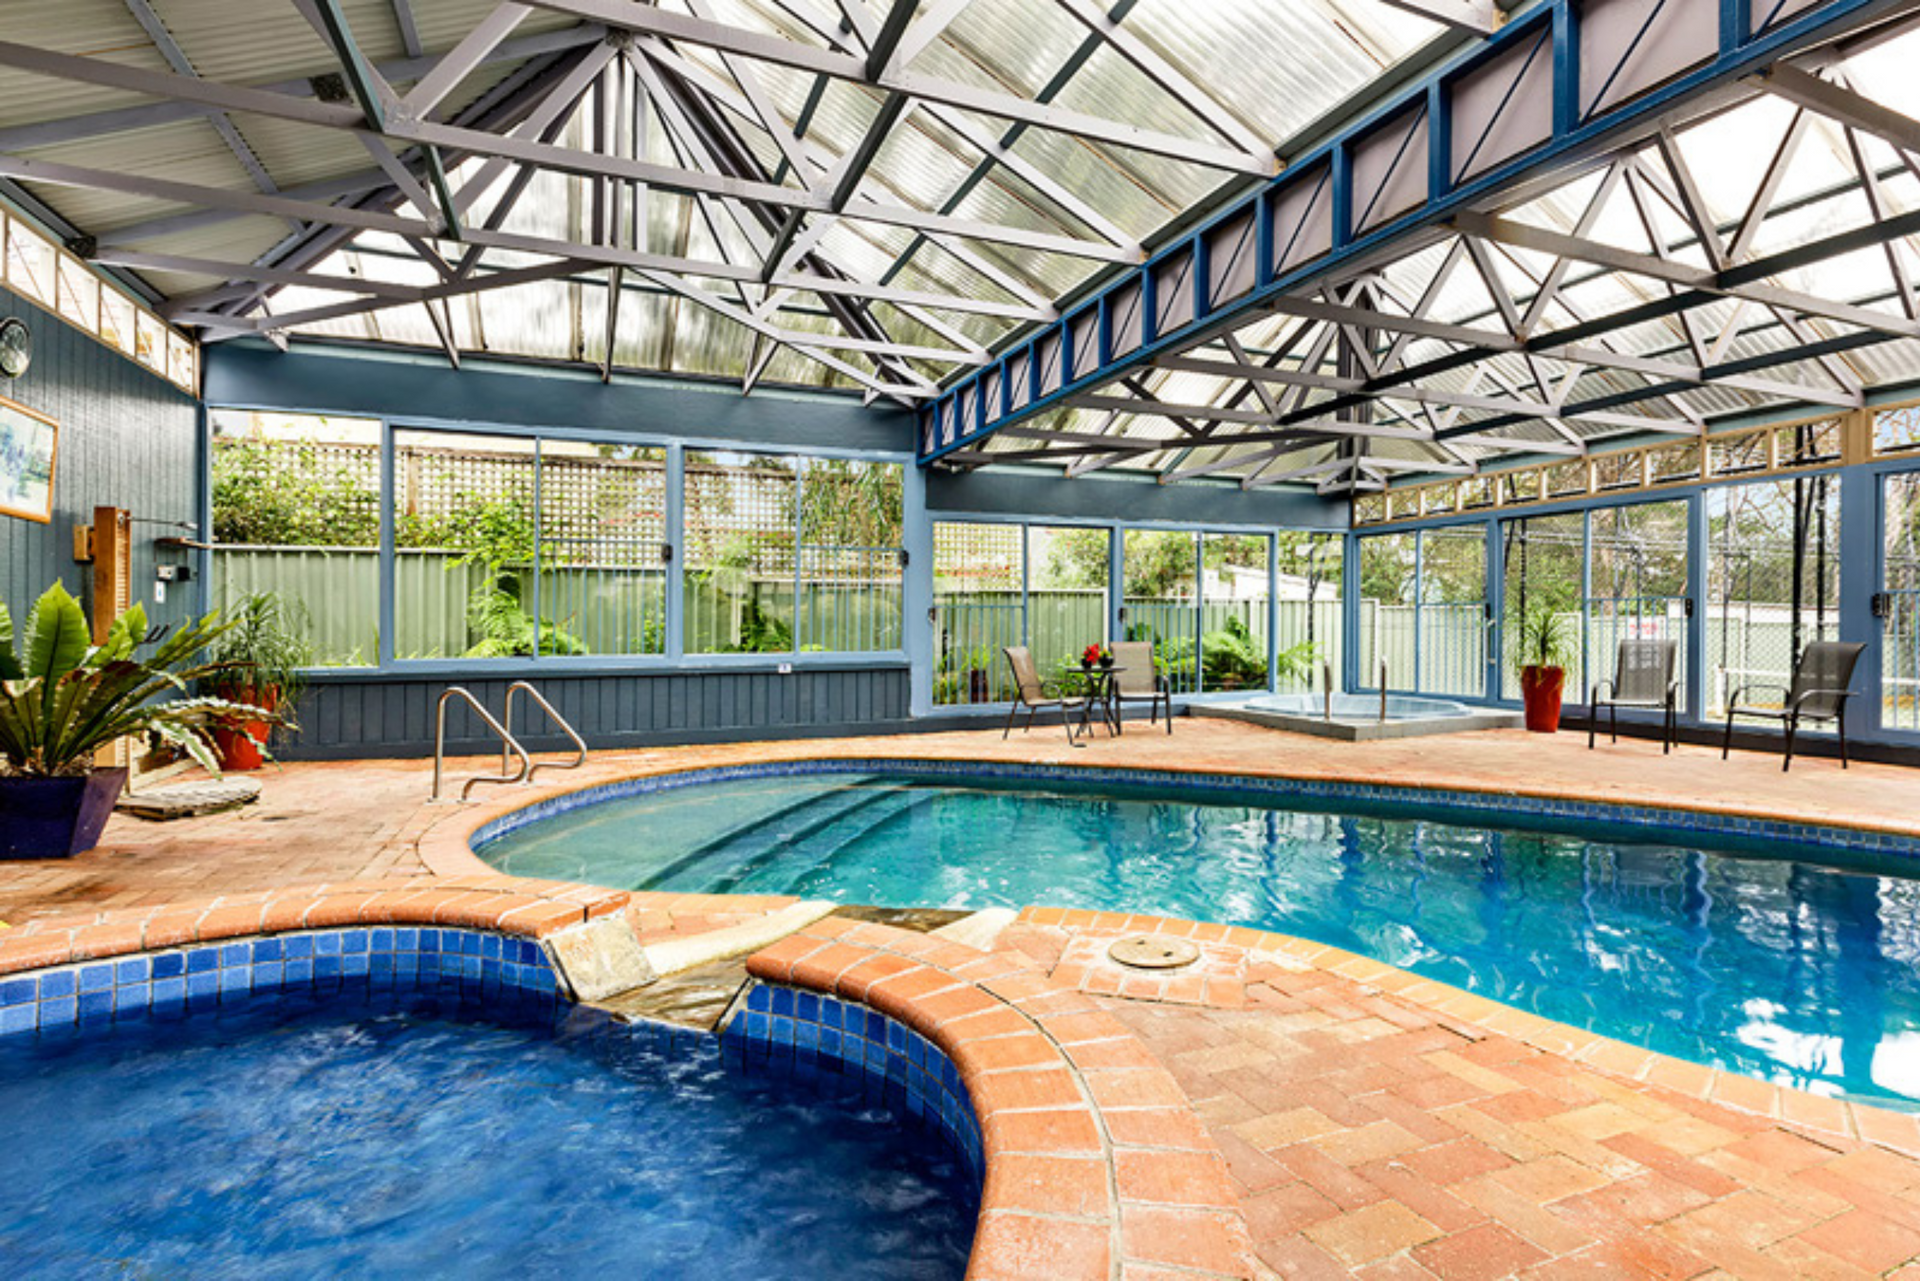 A large indoor swimming pool with a hot tub next to it.